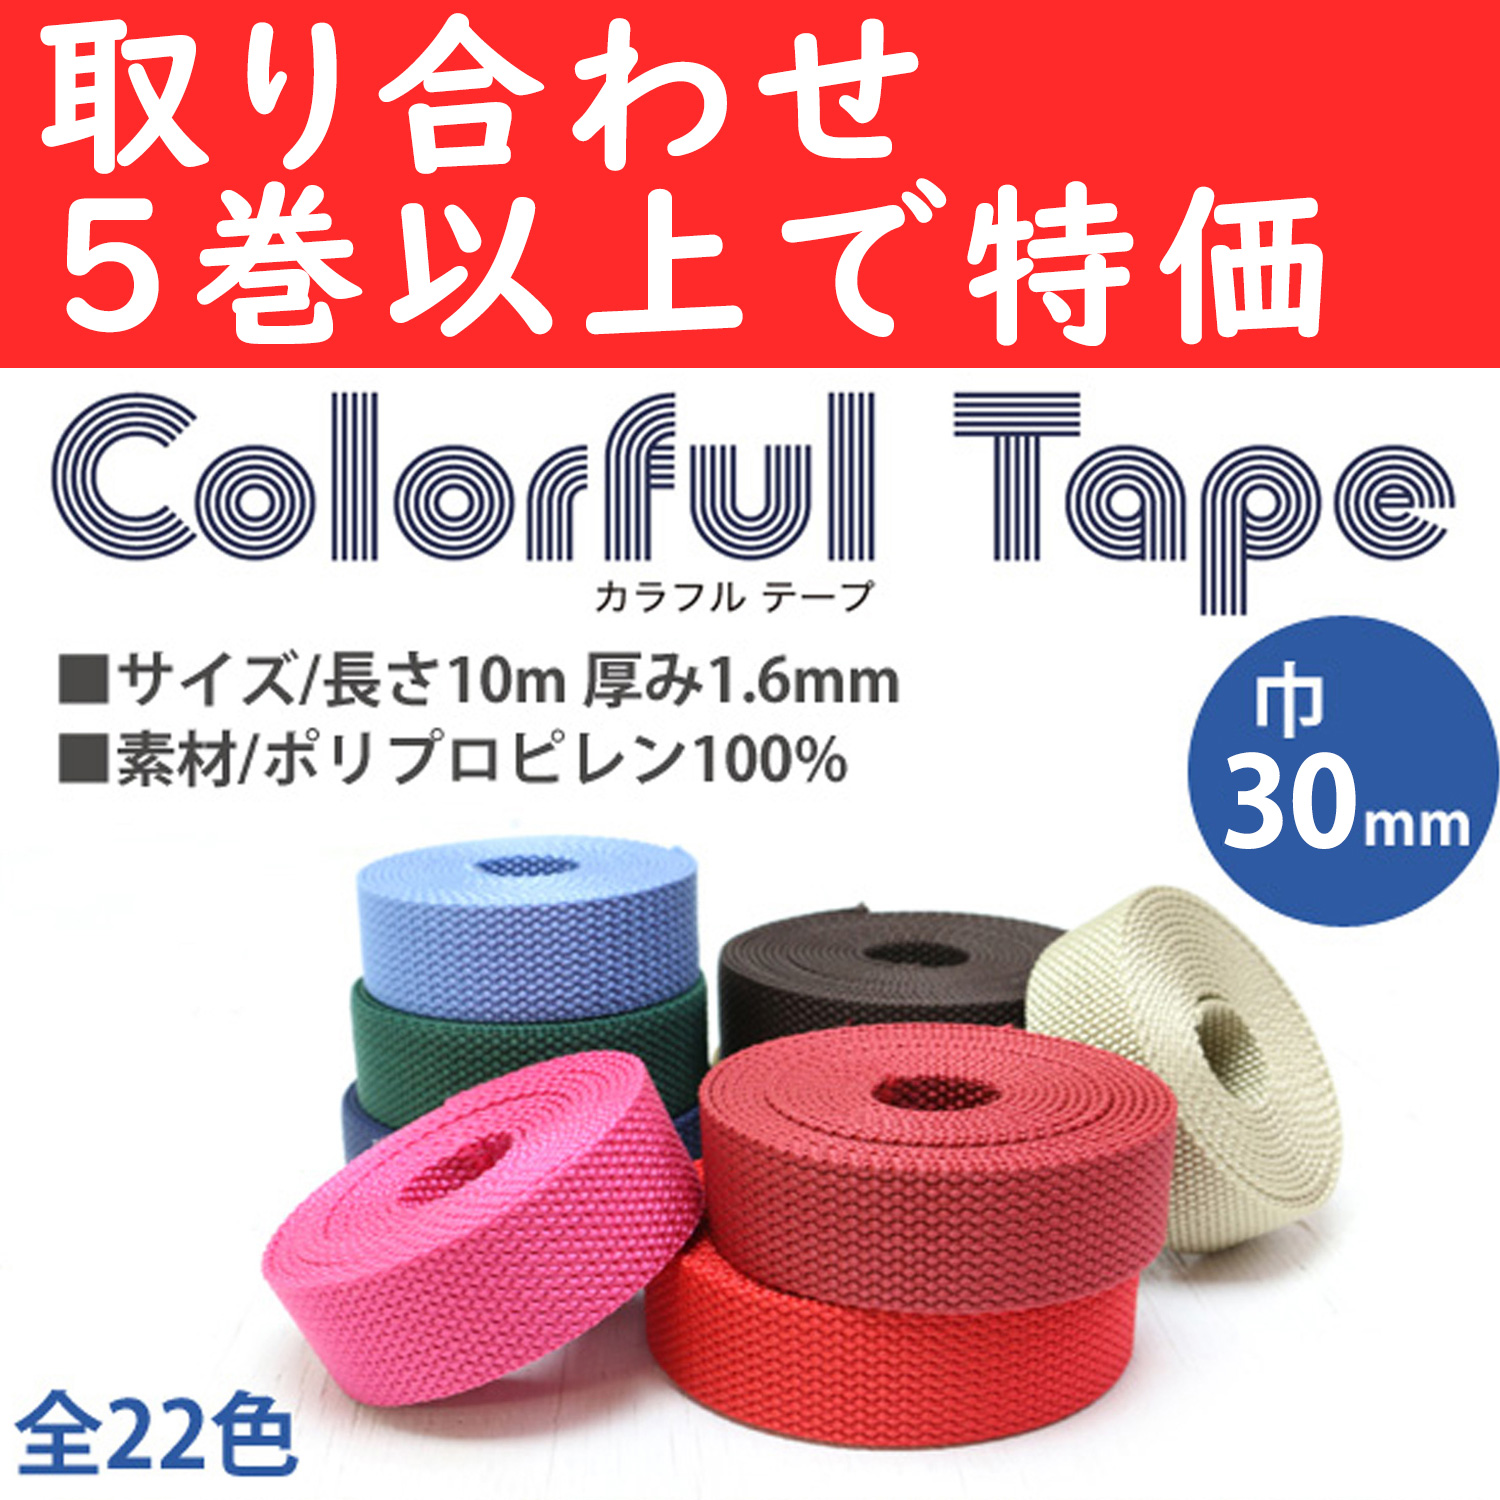 MHP3010-OVER5 Polyester Tape width 30mm x 10m Bulk Price for 5 units or more (roll)